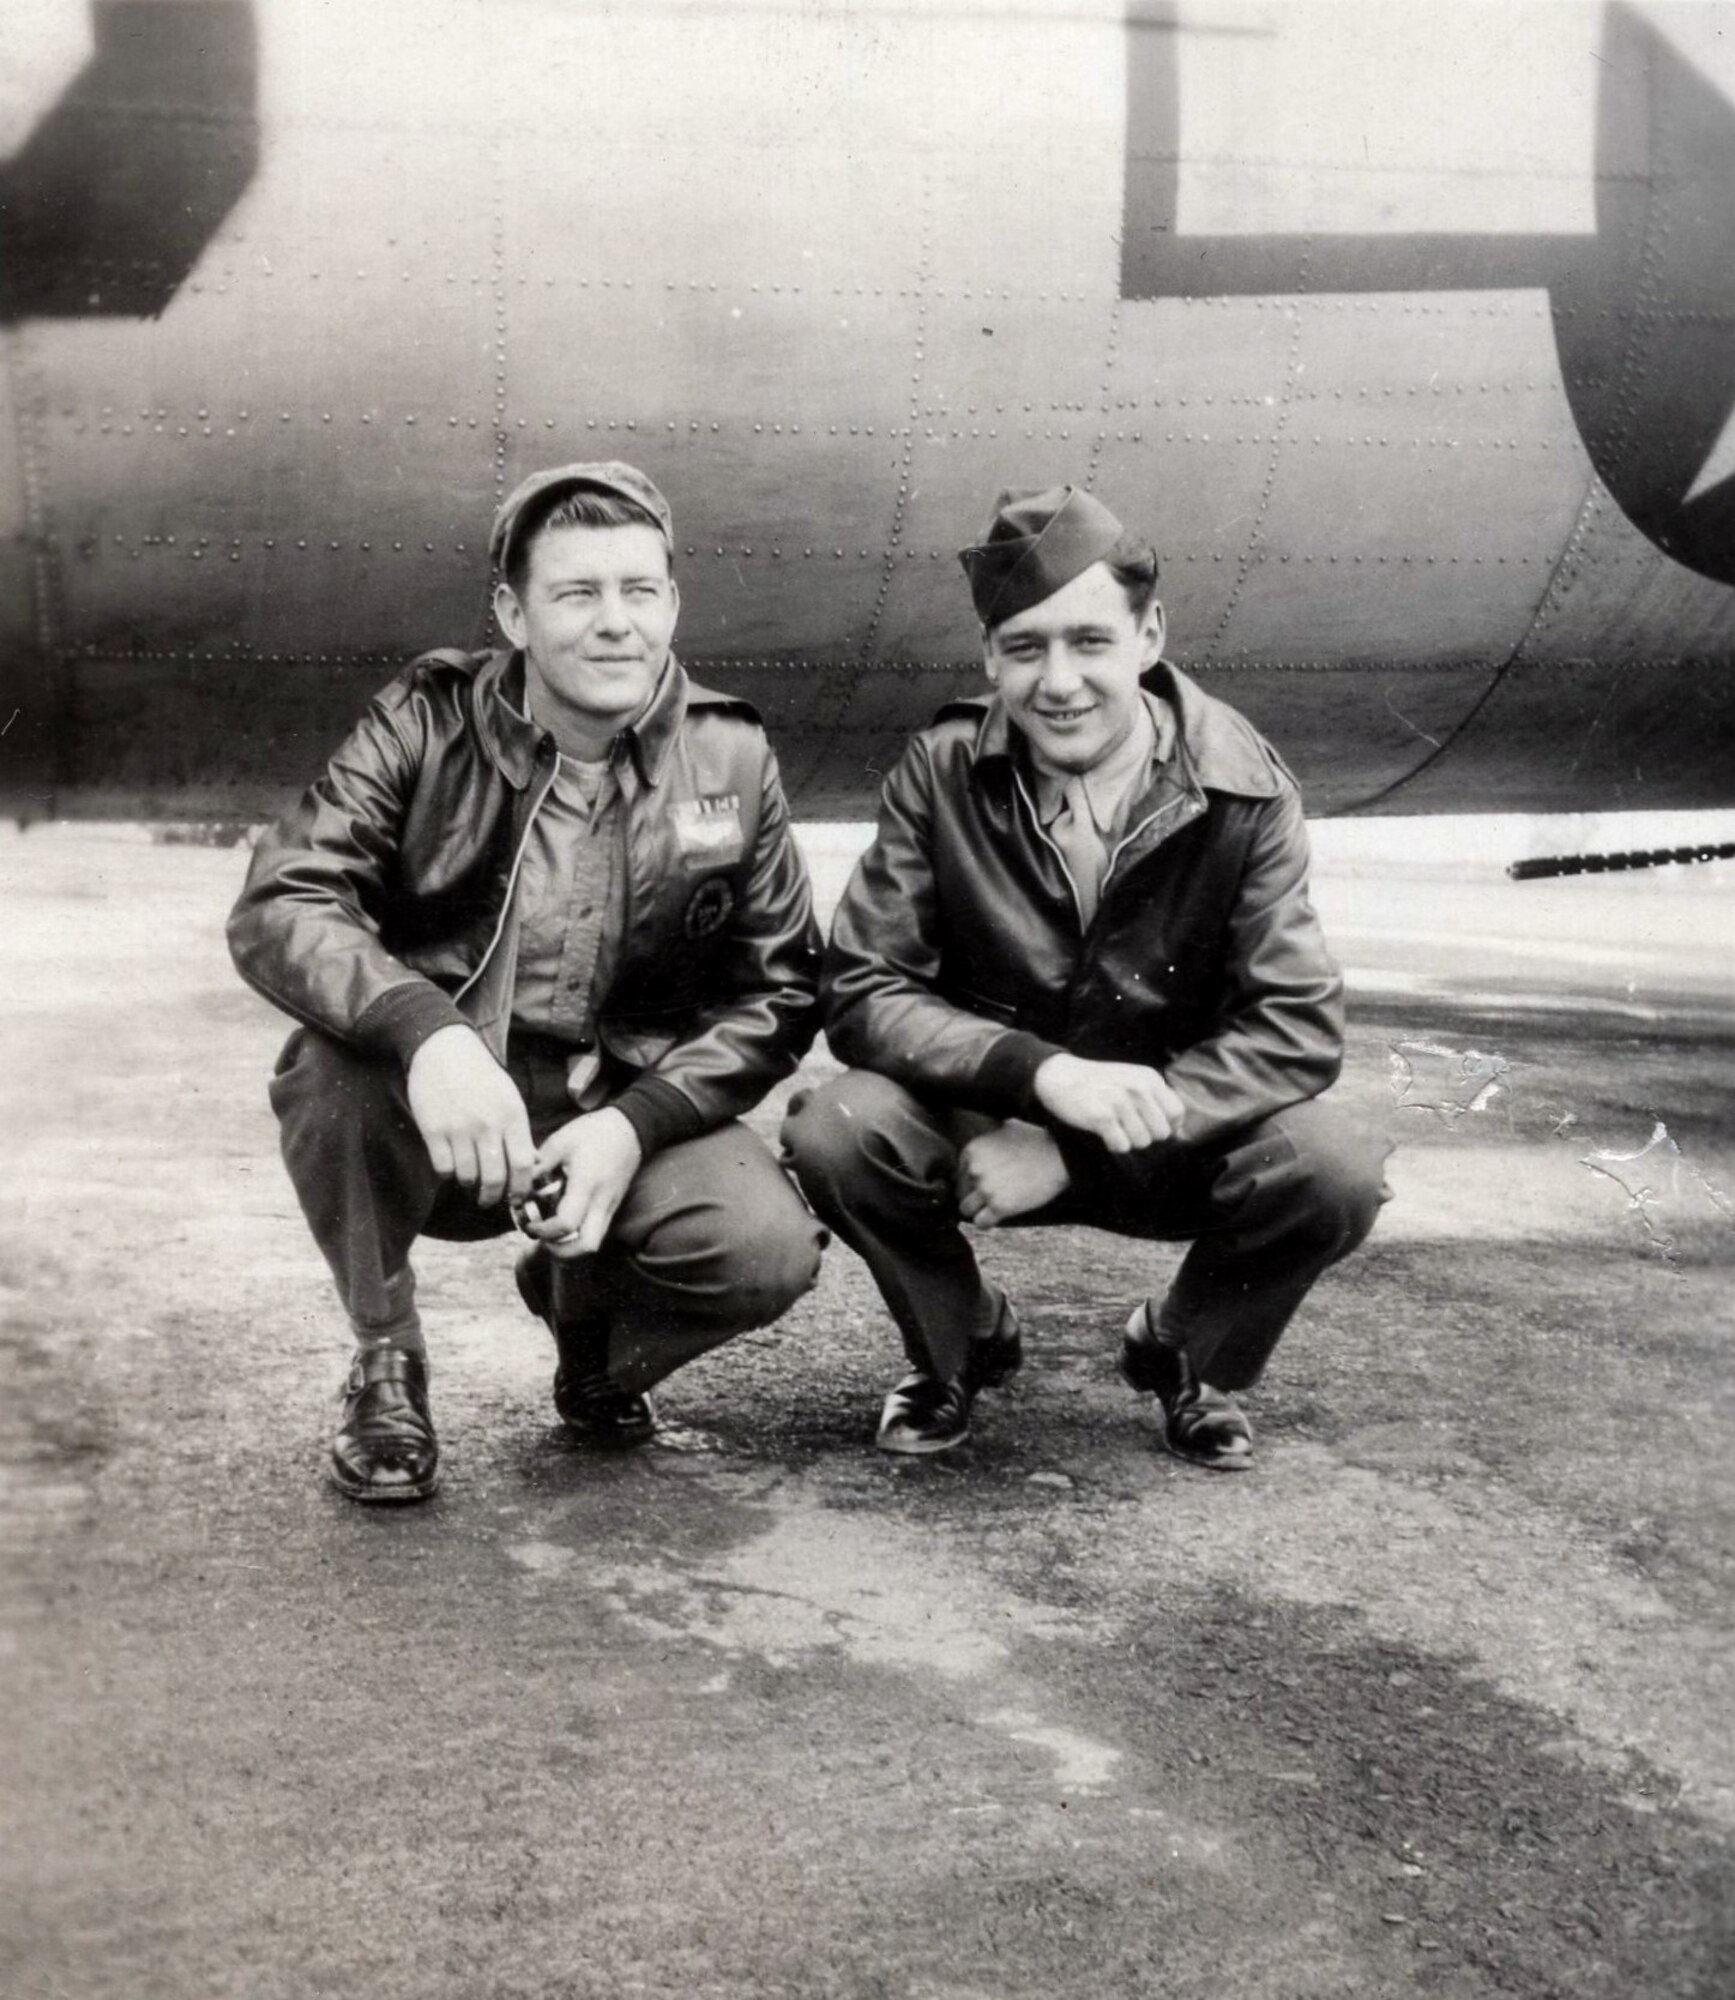 U.S. Army Air Force Staff Sgts. Myron “Ty” Ettus, right, and Frank Buschmeier, both waist gunners on “Miss Irish,” B-17 Flying Fortress, and part of then-Capt. John P. Gibbons crew, pose for a photo with their aircraft in 1944. Ettus was assigned to the 350th Bomb Squadron, 100th Bomb Group, out of Thorpe Abbotts, England, and completed 32 combat missions during World War II. (Photo courtesy of 100th Bomb Group Foundation, Bud Buschmeier)